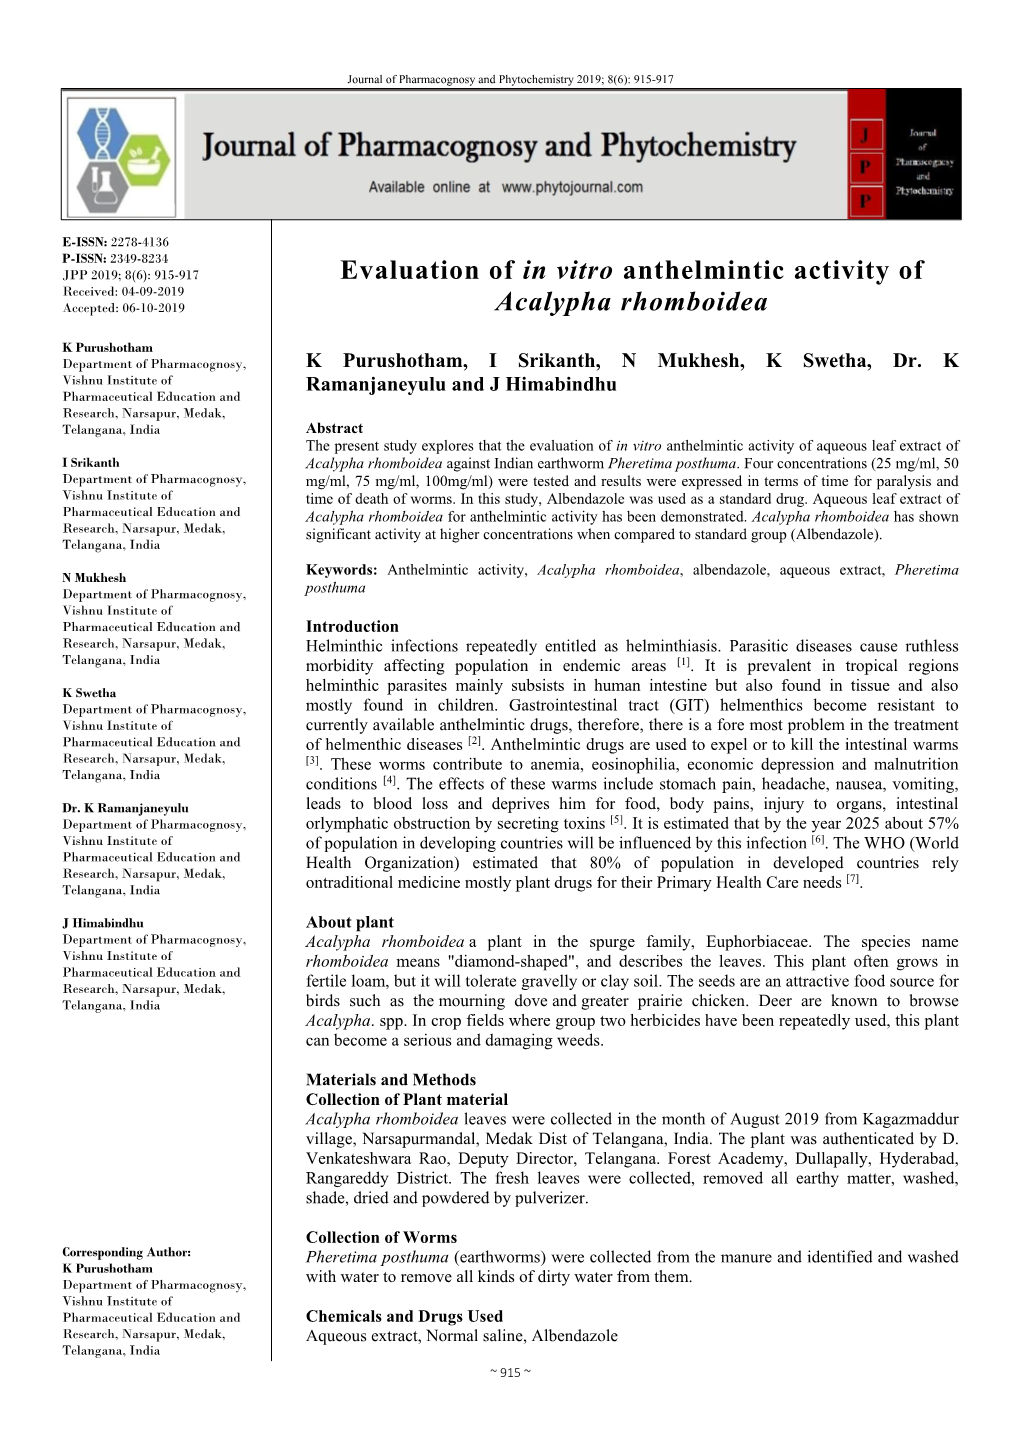 Evaluation of in Vitro Anthelmintic Activity of Acalypha Rhomboidea